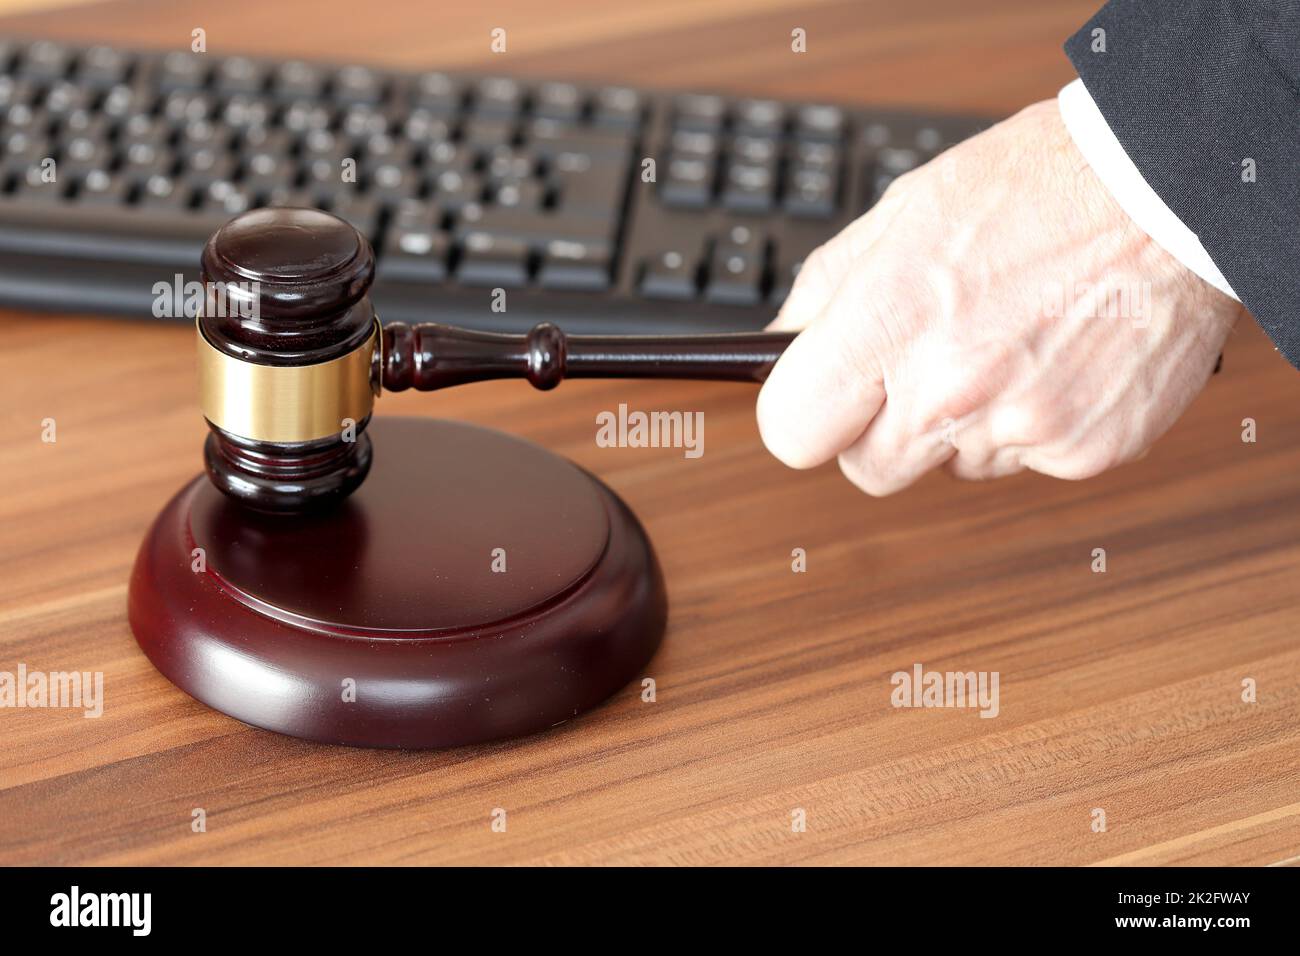 rights symbol with hammer and keyboard on table Stock Photo